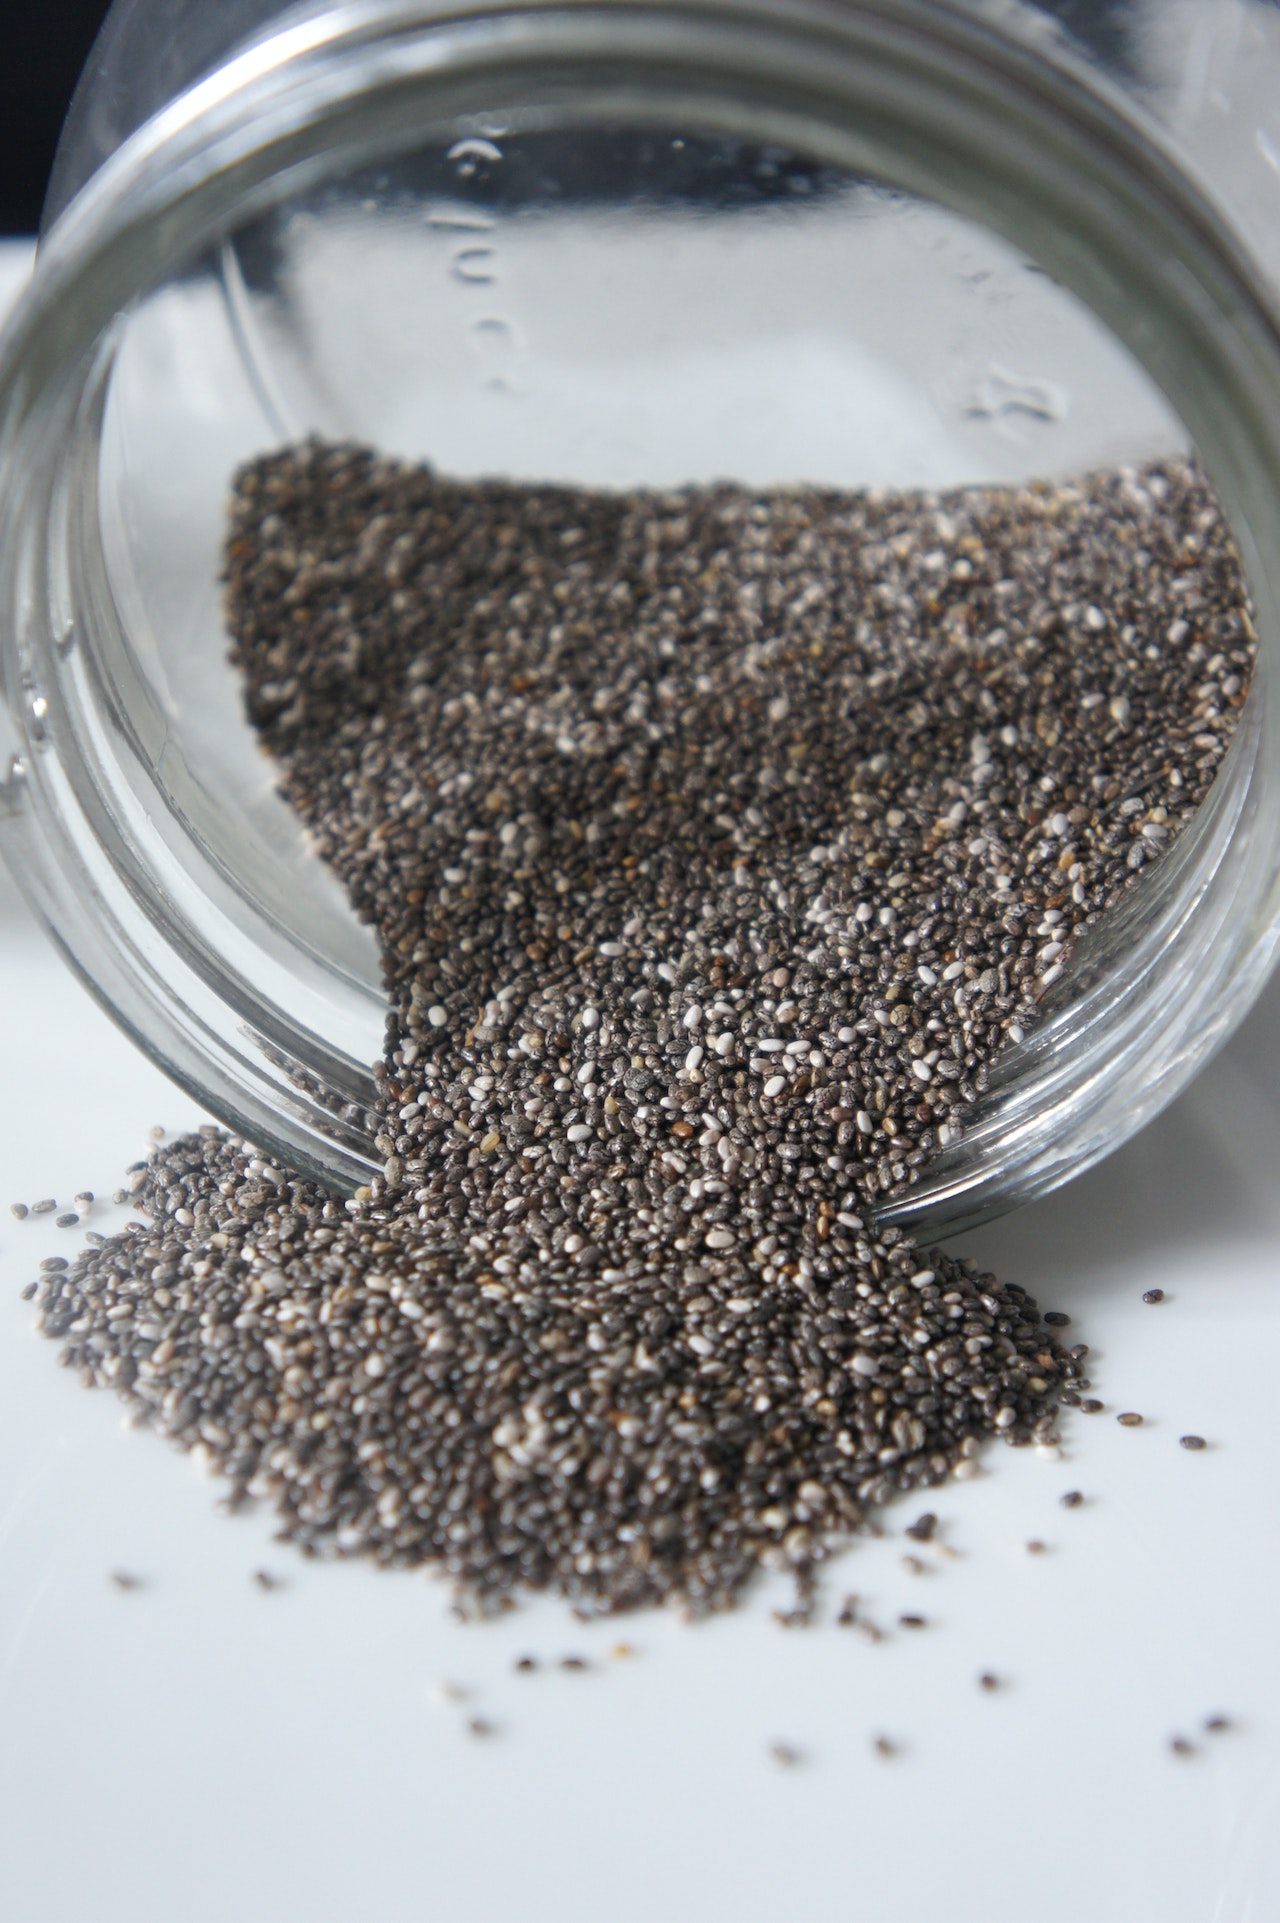 Chia seeds are beneficial for human health